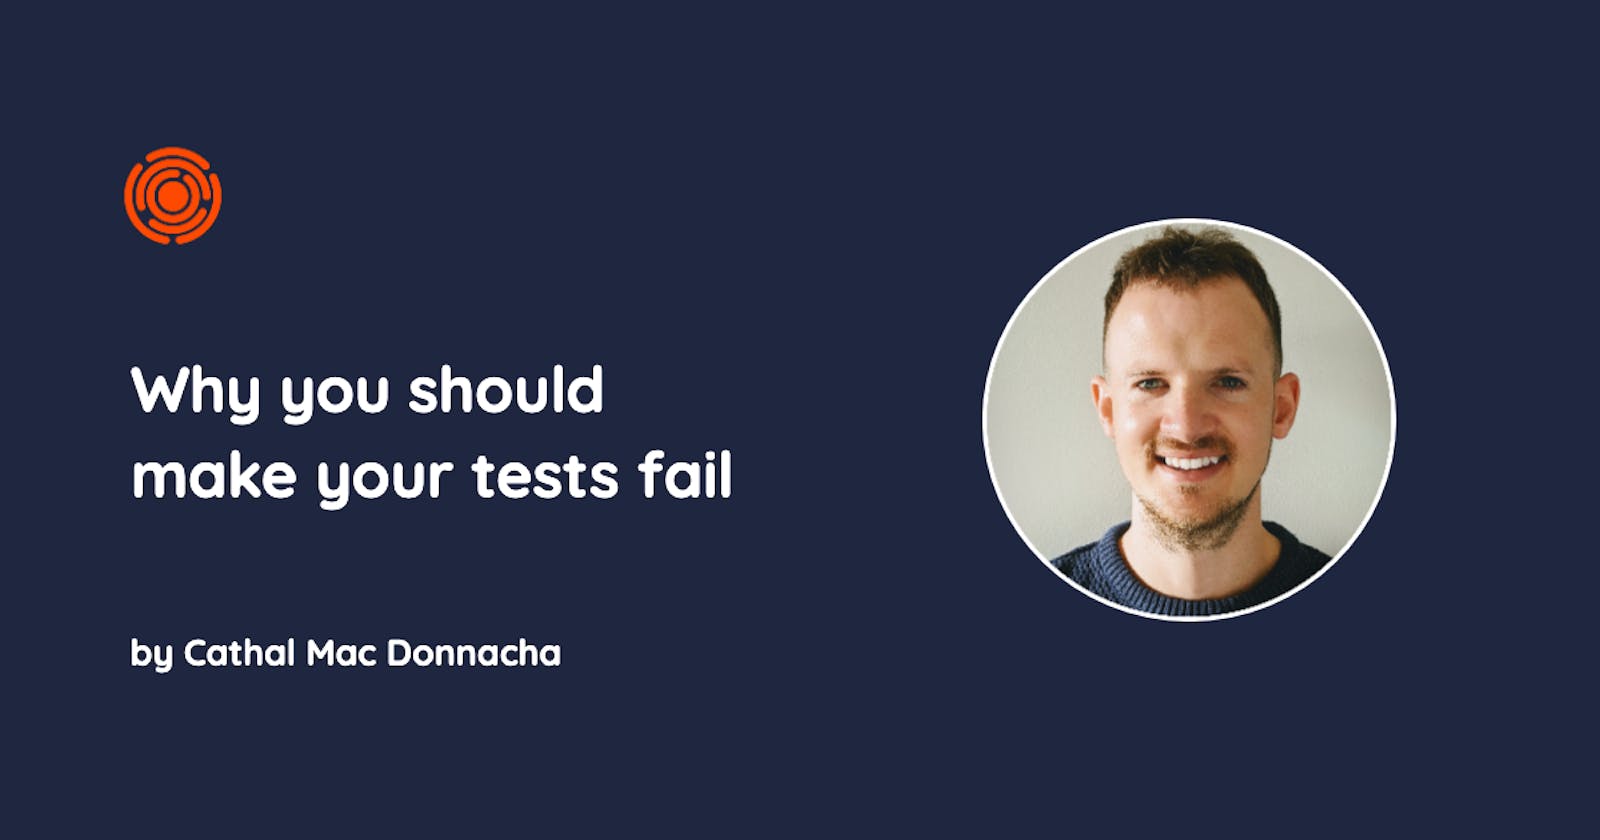 Why you should make your tests fail